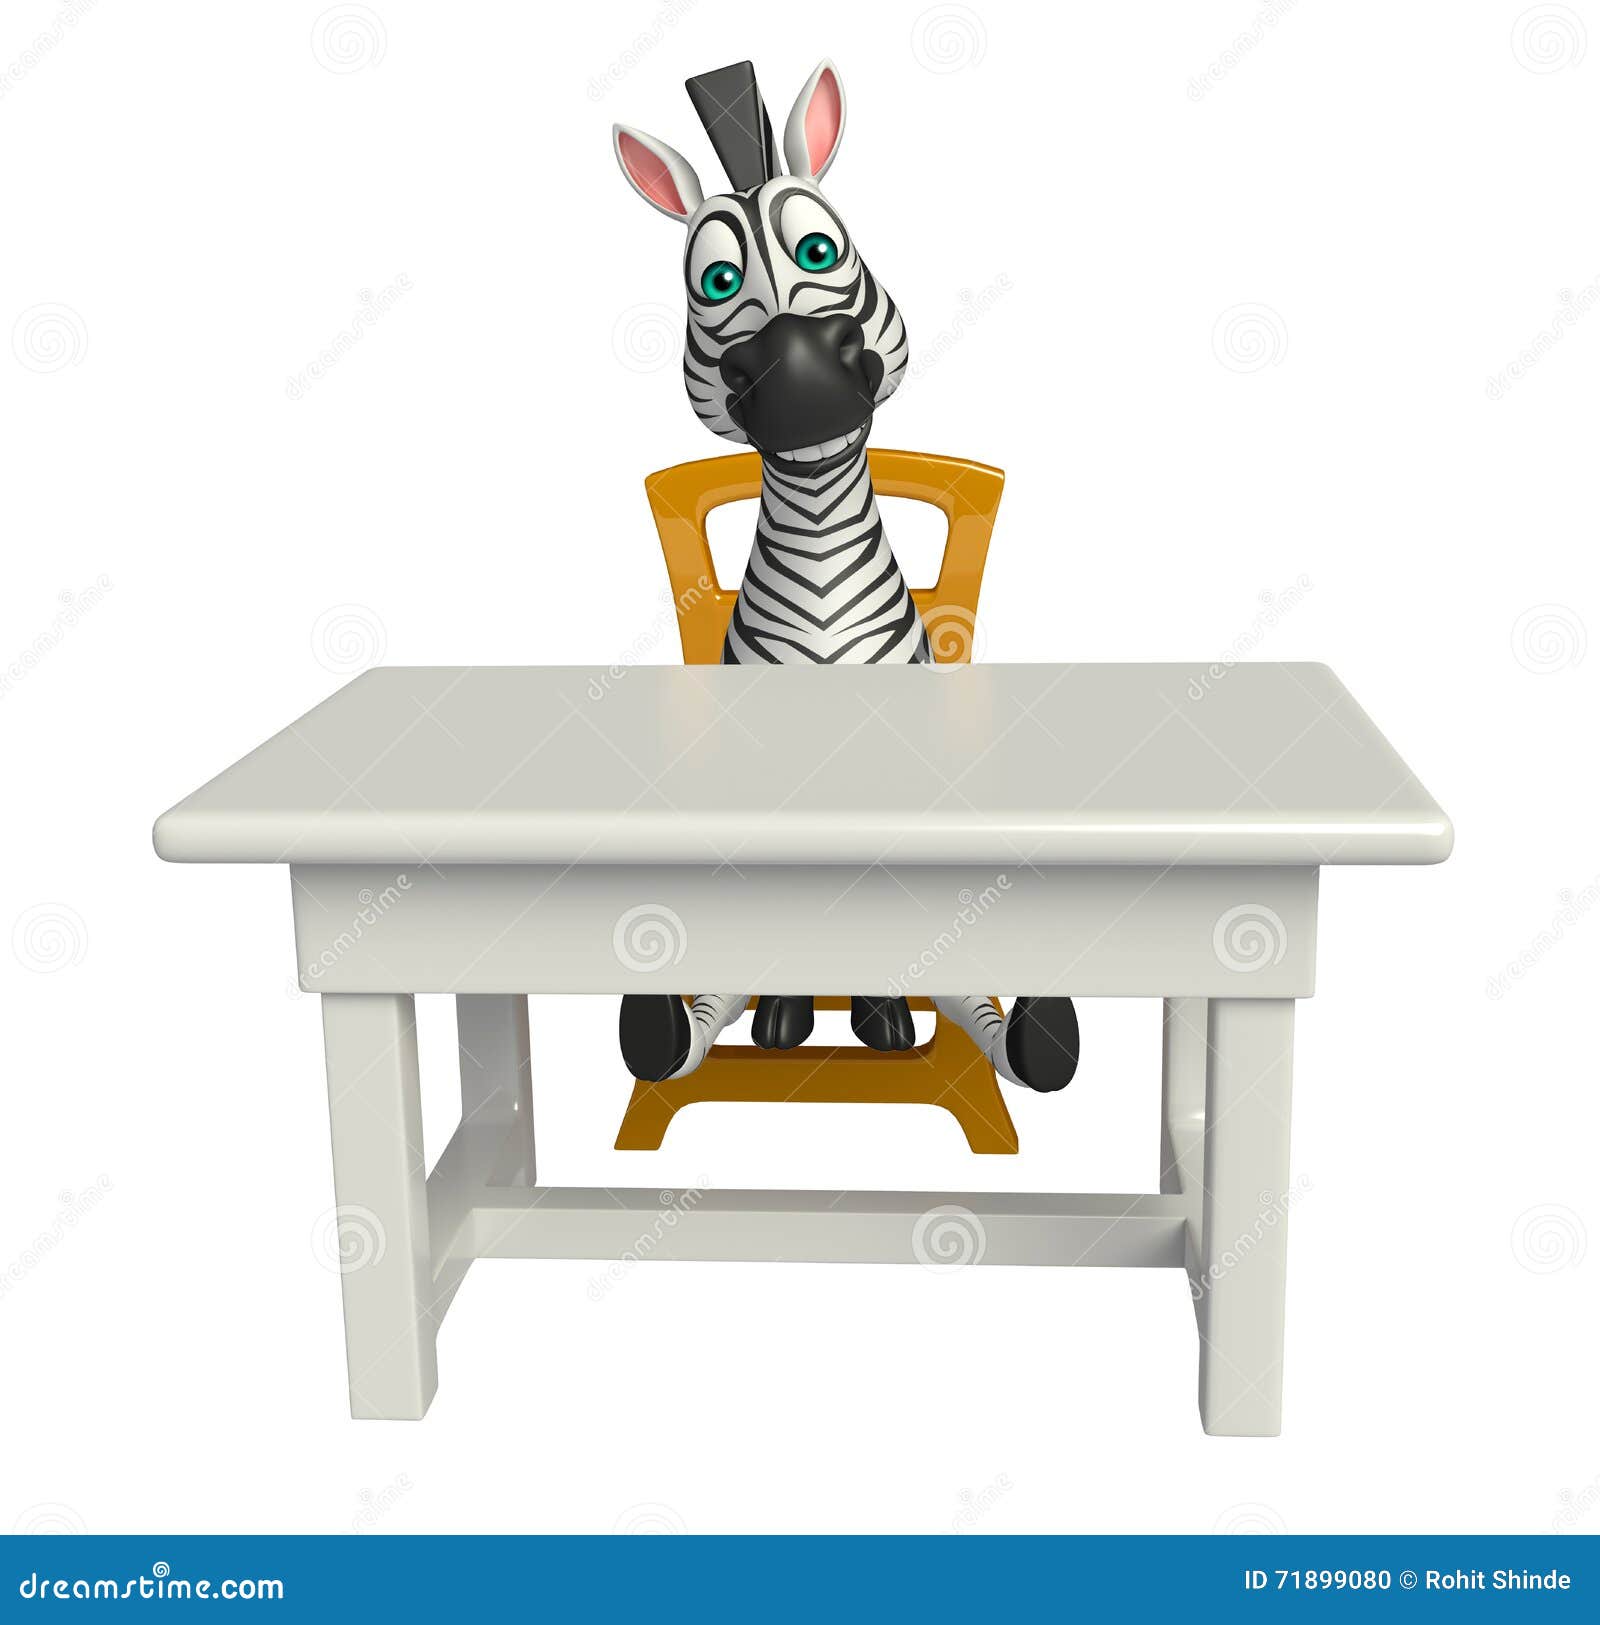 Cute Zebra Cartoon Character With Table And Chair Stock